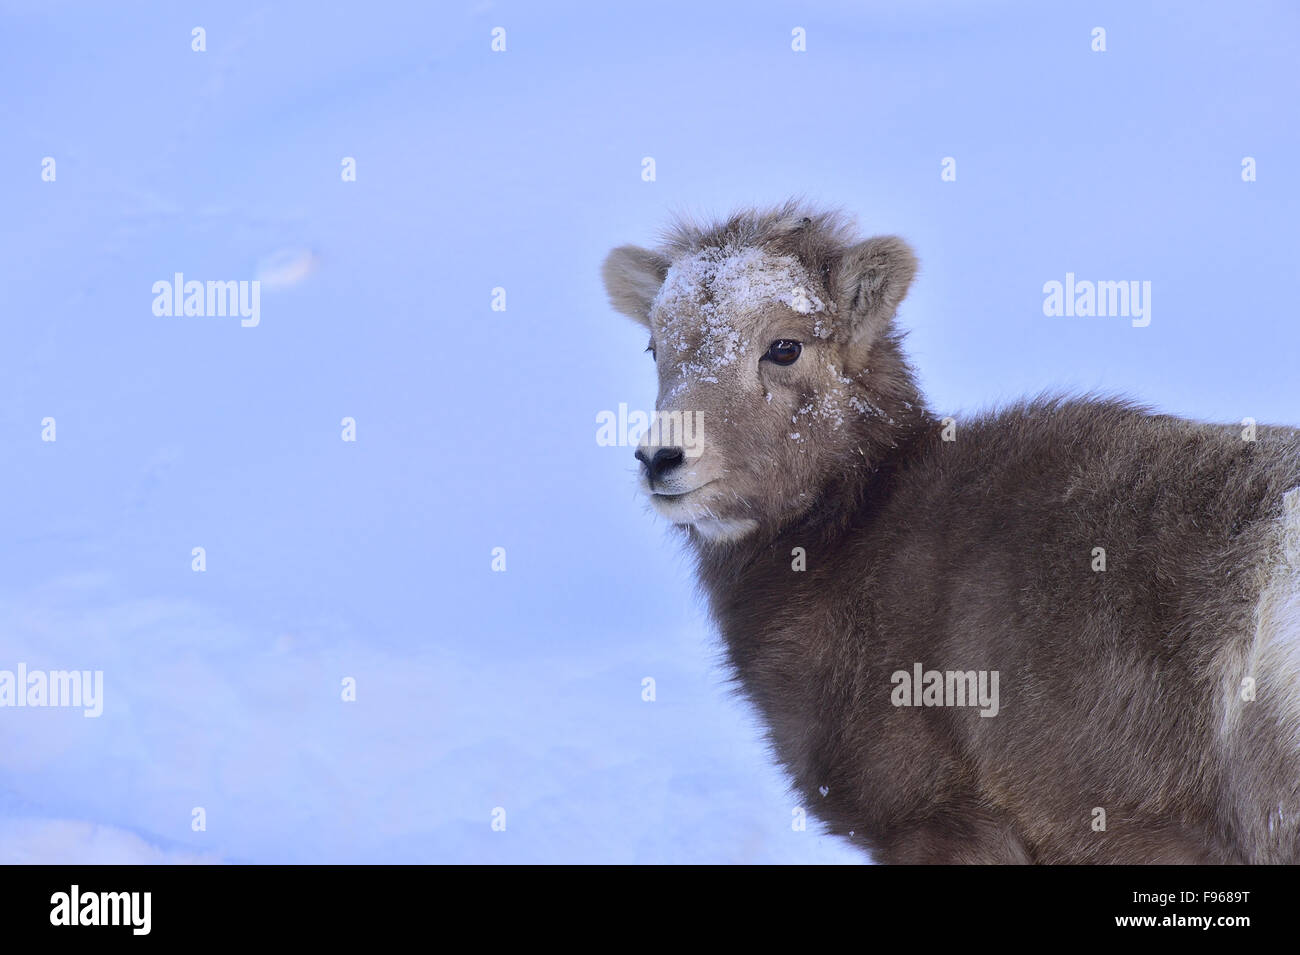 A portrait image of a wild baby bighorn sheep  Orvis canadensis, against a snowy background in the soft evening light. Stock Photo